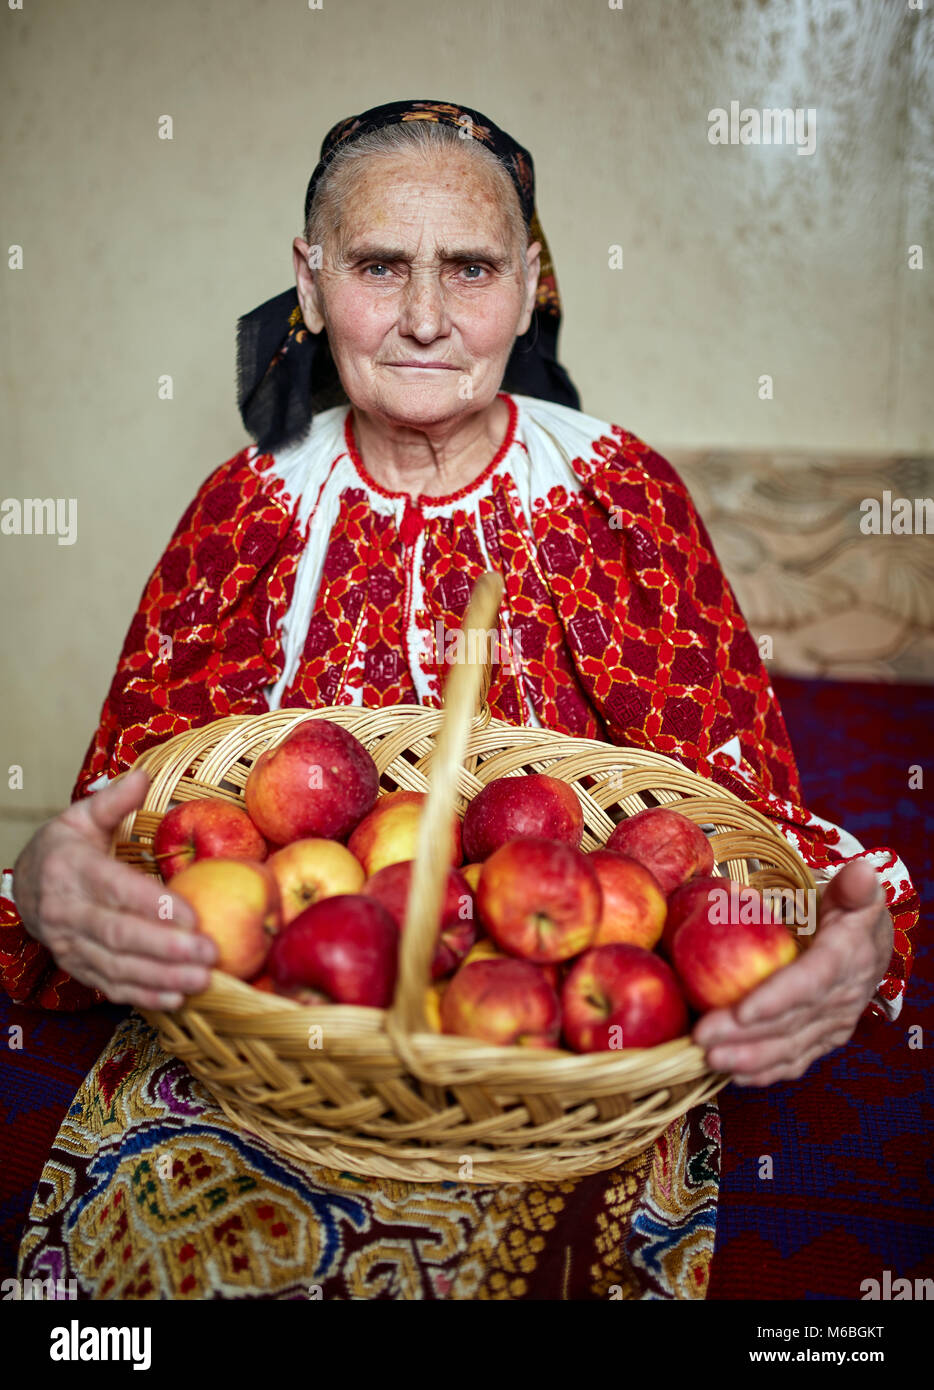 Old farmer woman in traditional costume holding a basket full of apples  Stock Photo - Alamy